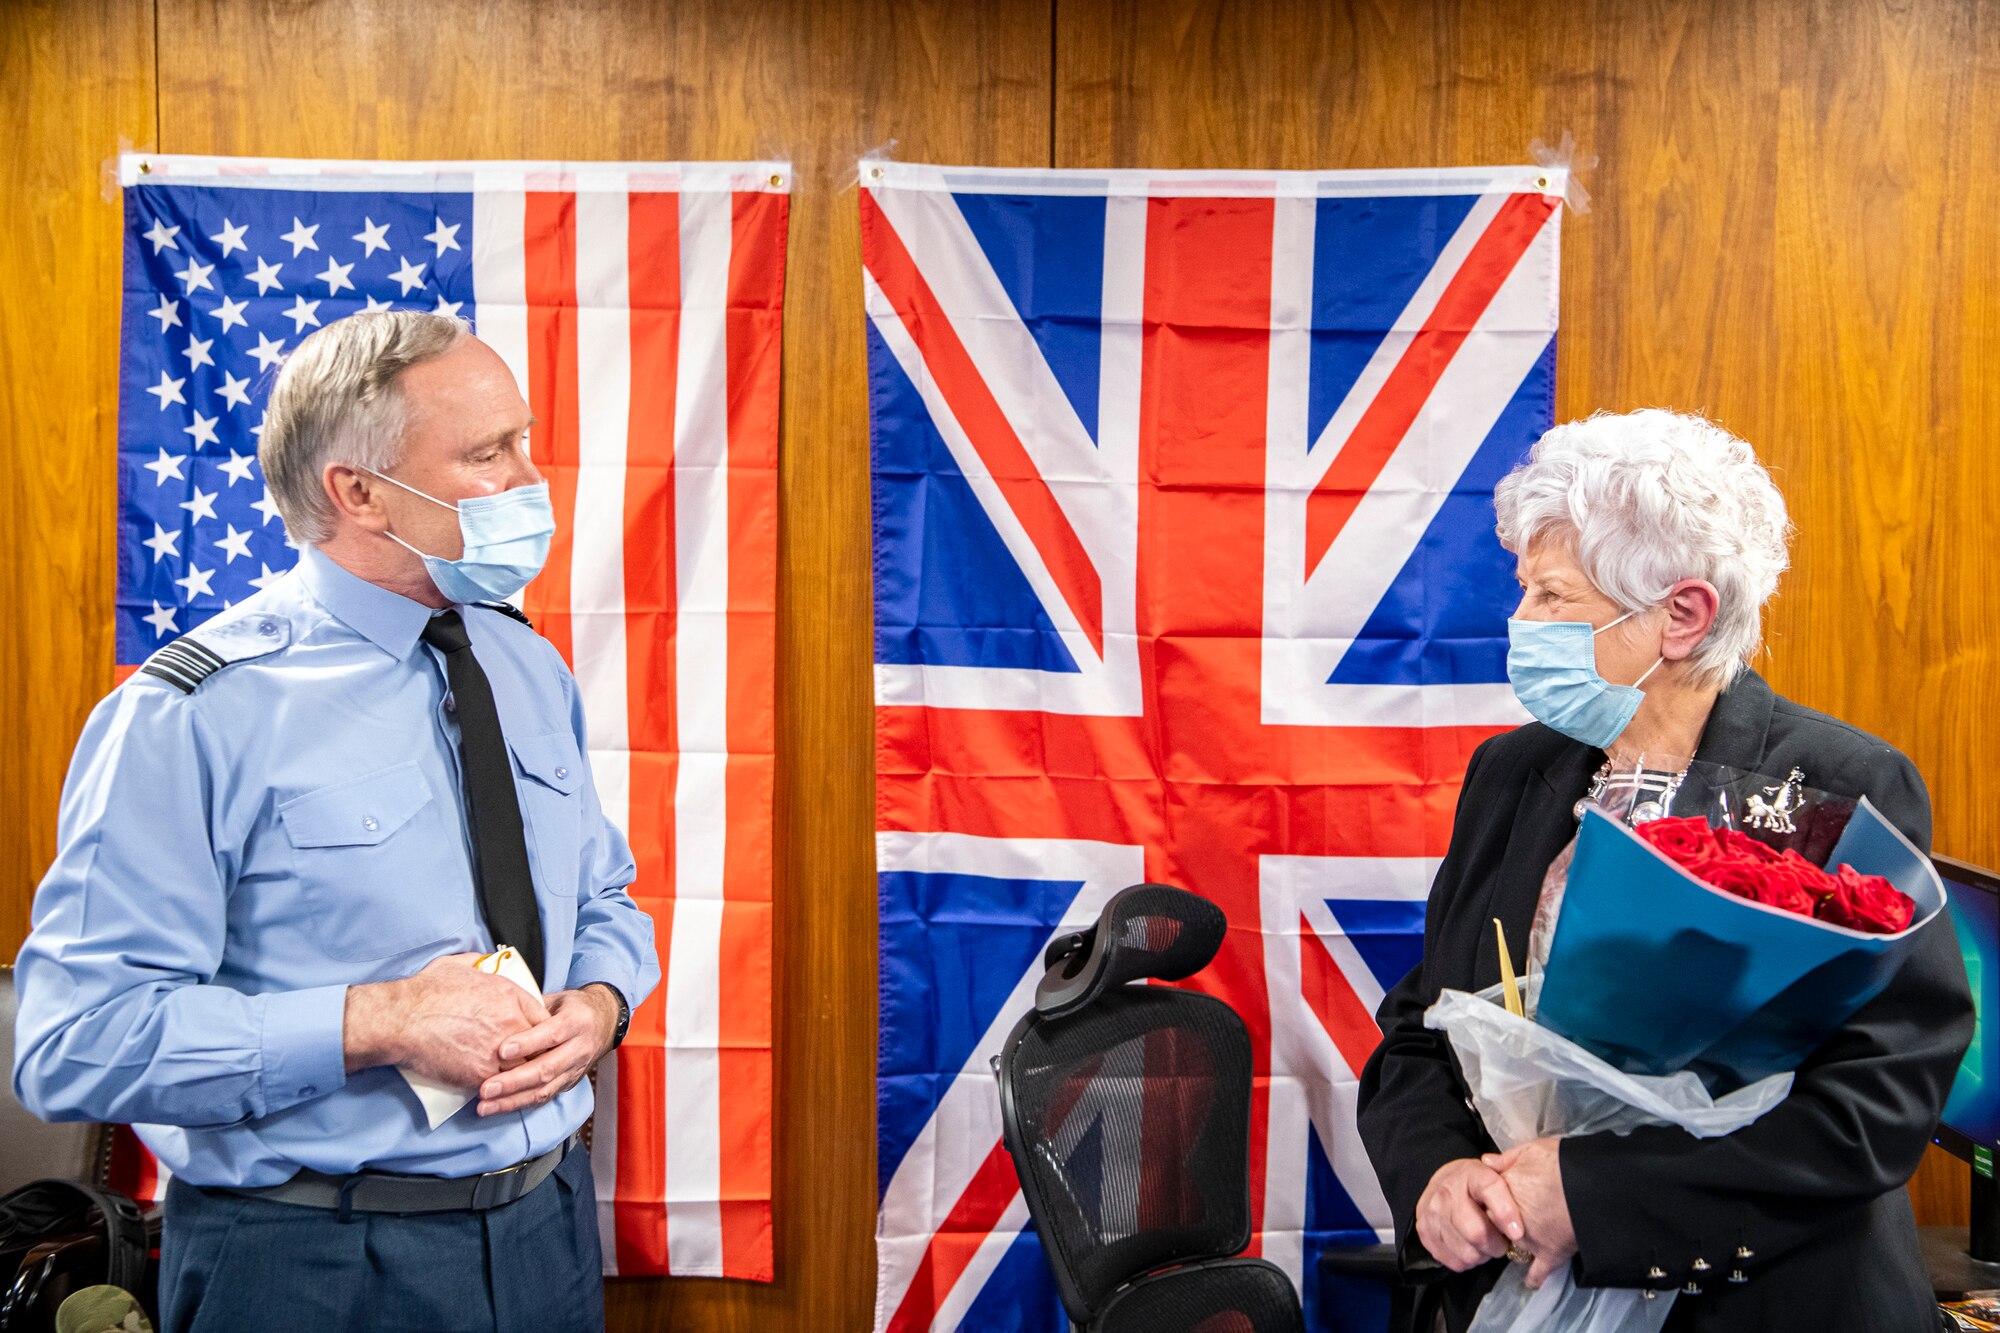 Squadron Leader Clive Wood, left, Royal Air Force Alconbury, RAF Molesworth and RAF Croughton commander, speaks with Valerie Lucas, 501st Combat Support Wing British liaison officer, during a celebration at RAF Alconbury, England, April 23, 2021. The 501 CSW/JA office celebrated Mrs. Lucas for her 60 years of service as the British liaison officer at RAF Alconbury. (U.S. Air Force photo by Senior Airman Eugene Oliver)